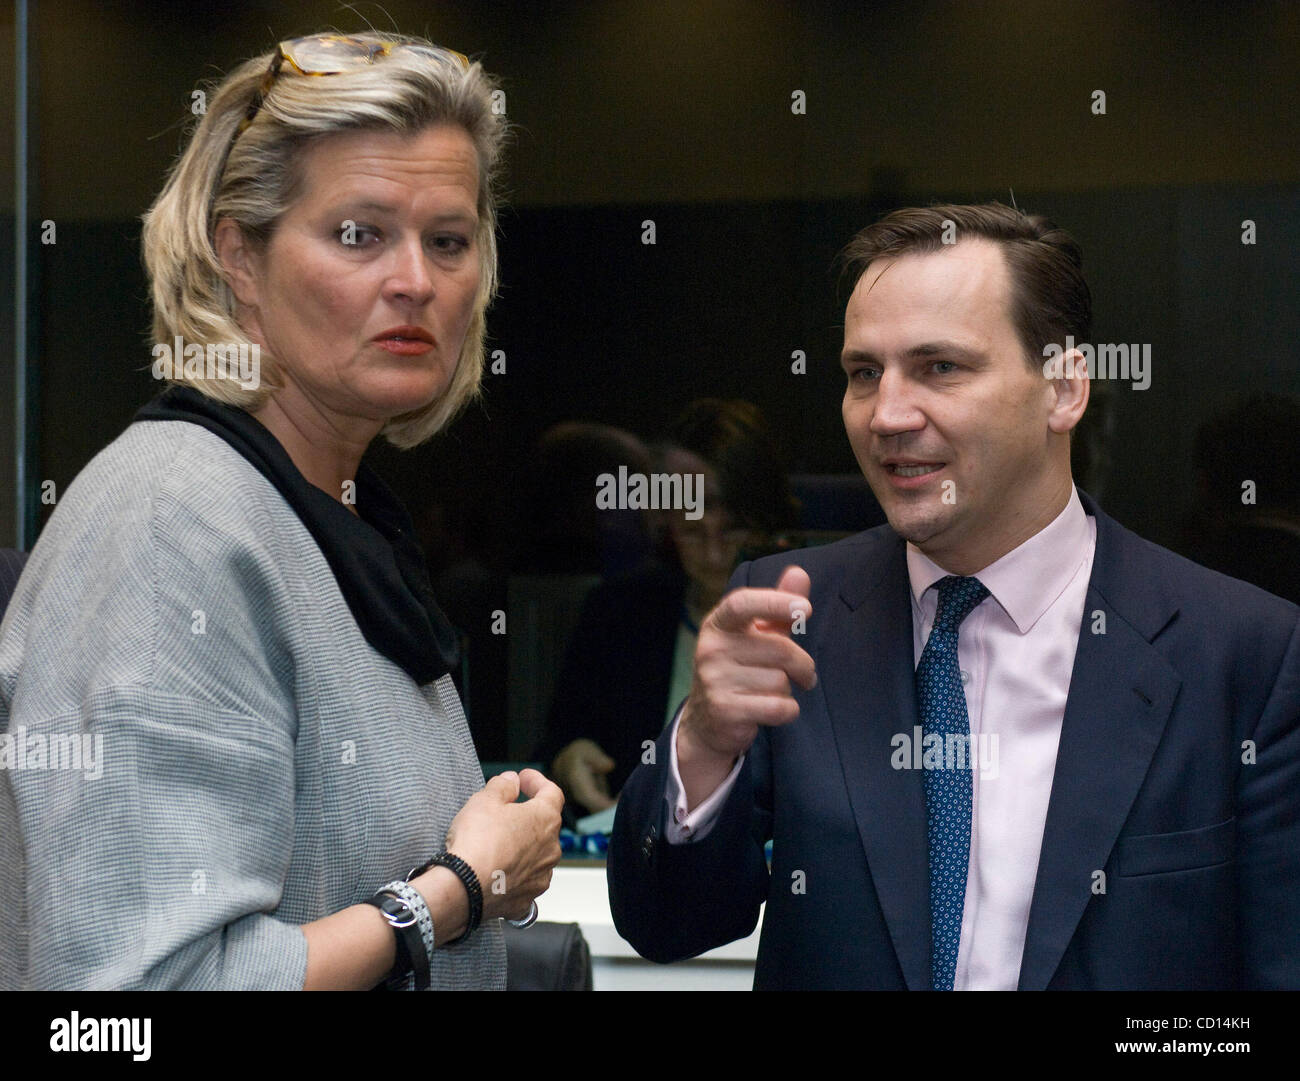 Polish Foreign Minister Radek Sikorski and Austrian minister , Ursula Plassnik  chat before a European Union General Affairs and External Relations Council meeting on April 29, 2008 in Luxembourg.[© by Wiktor Dabkowski] .... Stock Photo